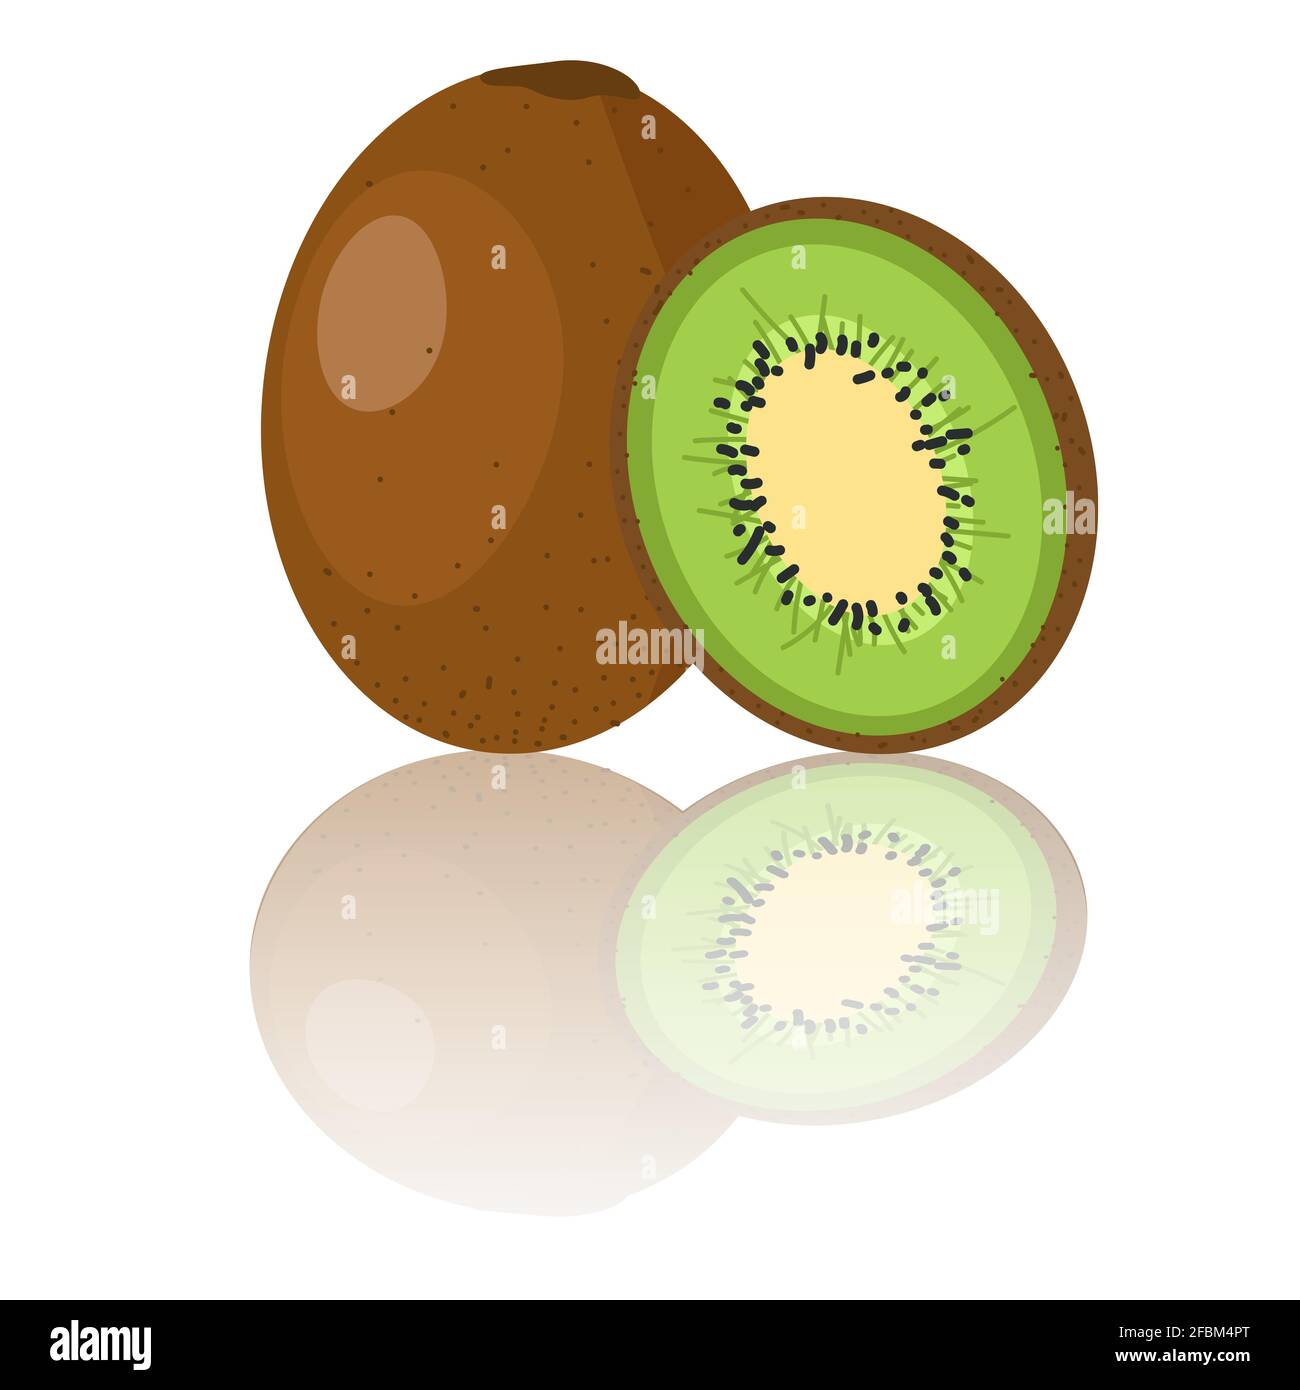 Kiwi fruit whole and sliced vector illustration exotic fruit for health diet and vitamin C source Stock Vector